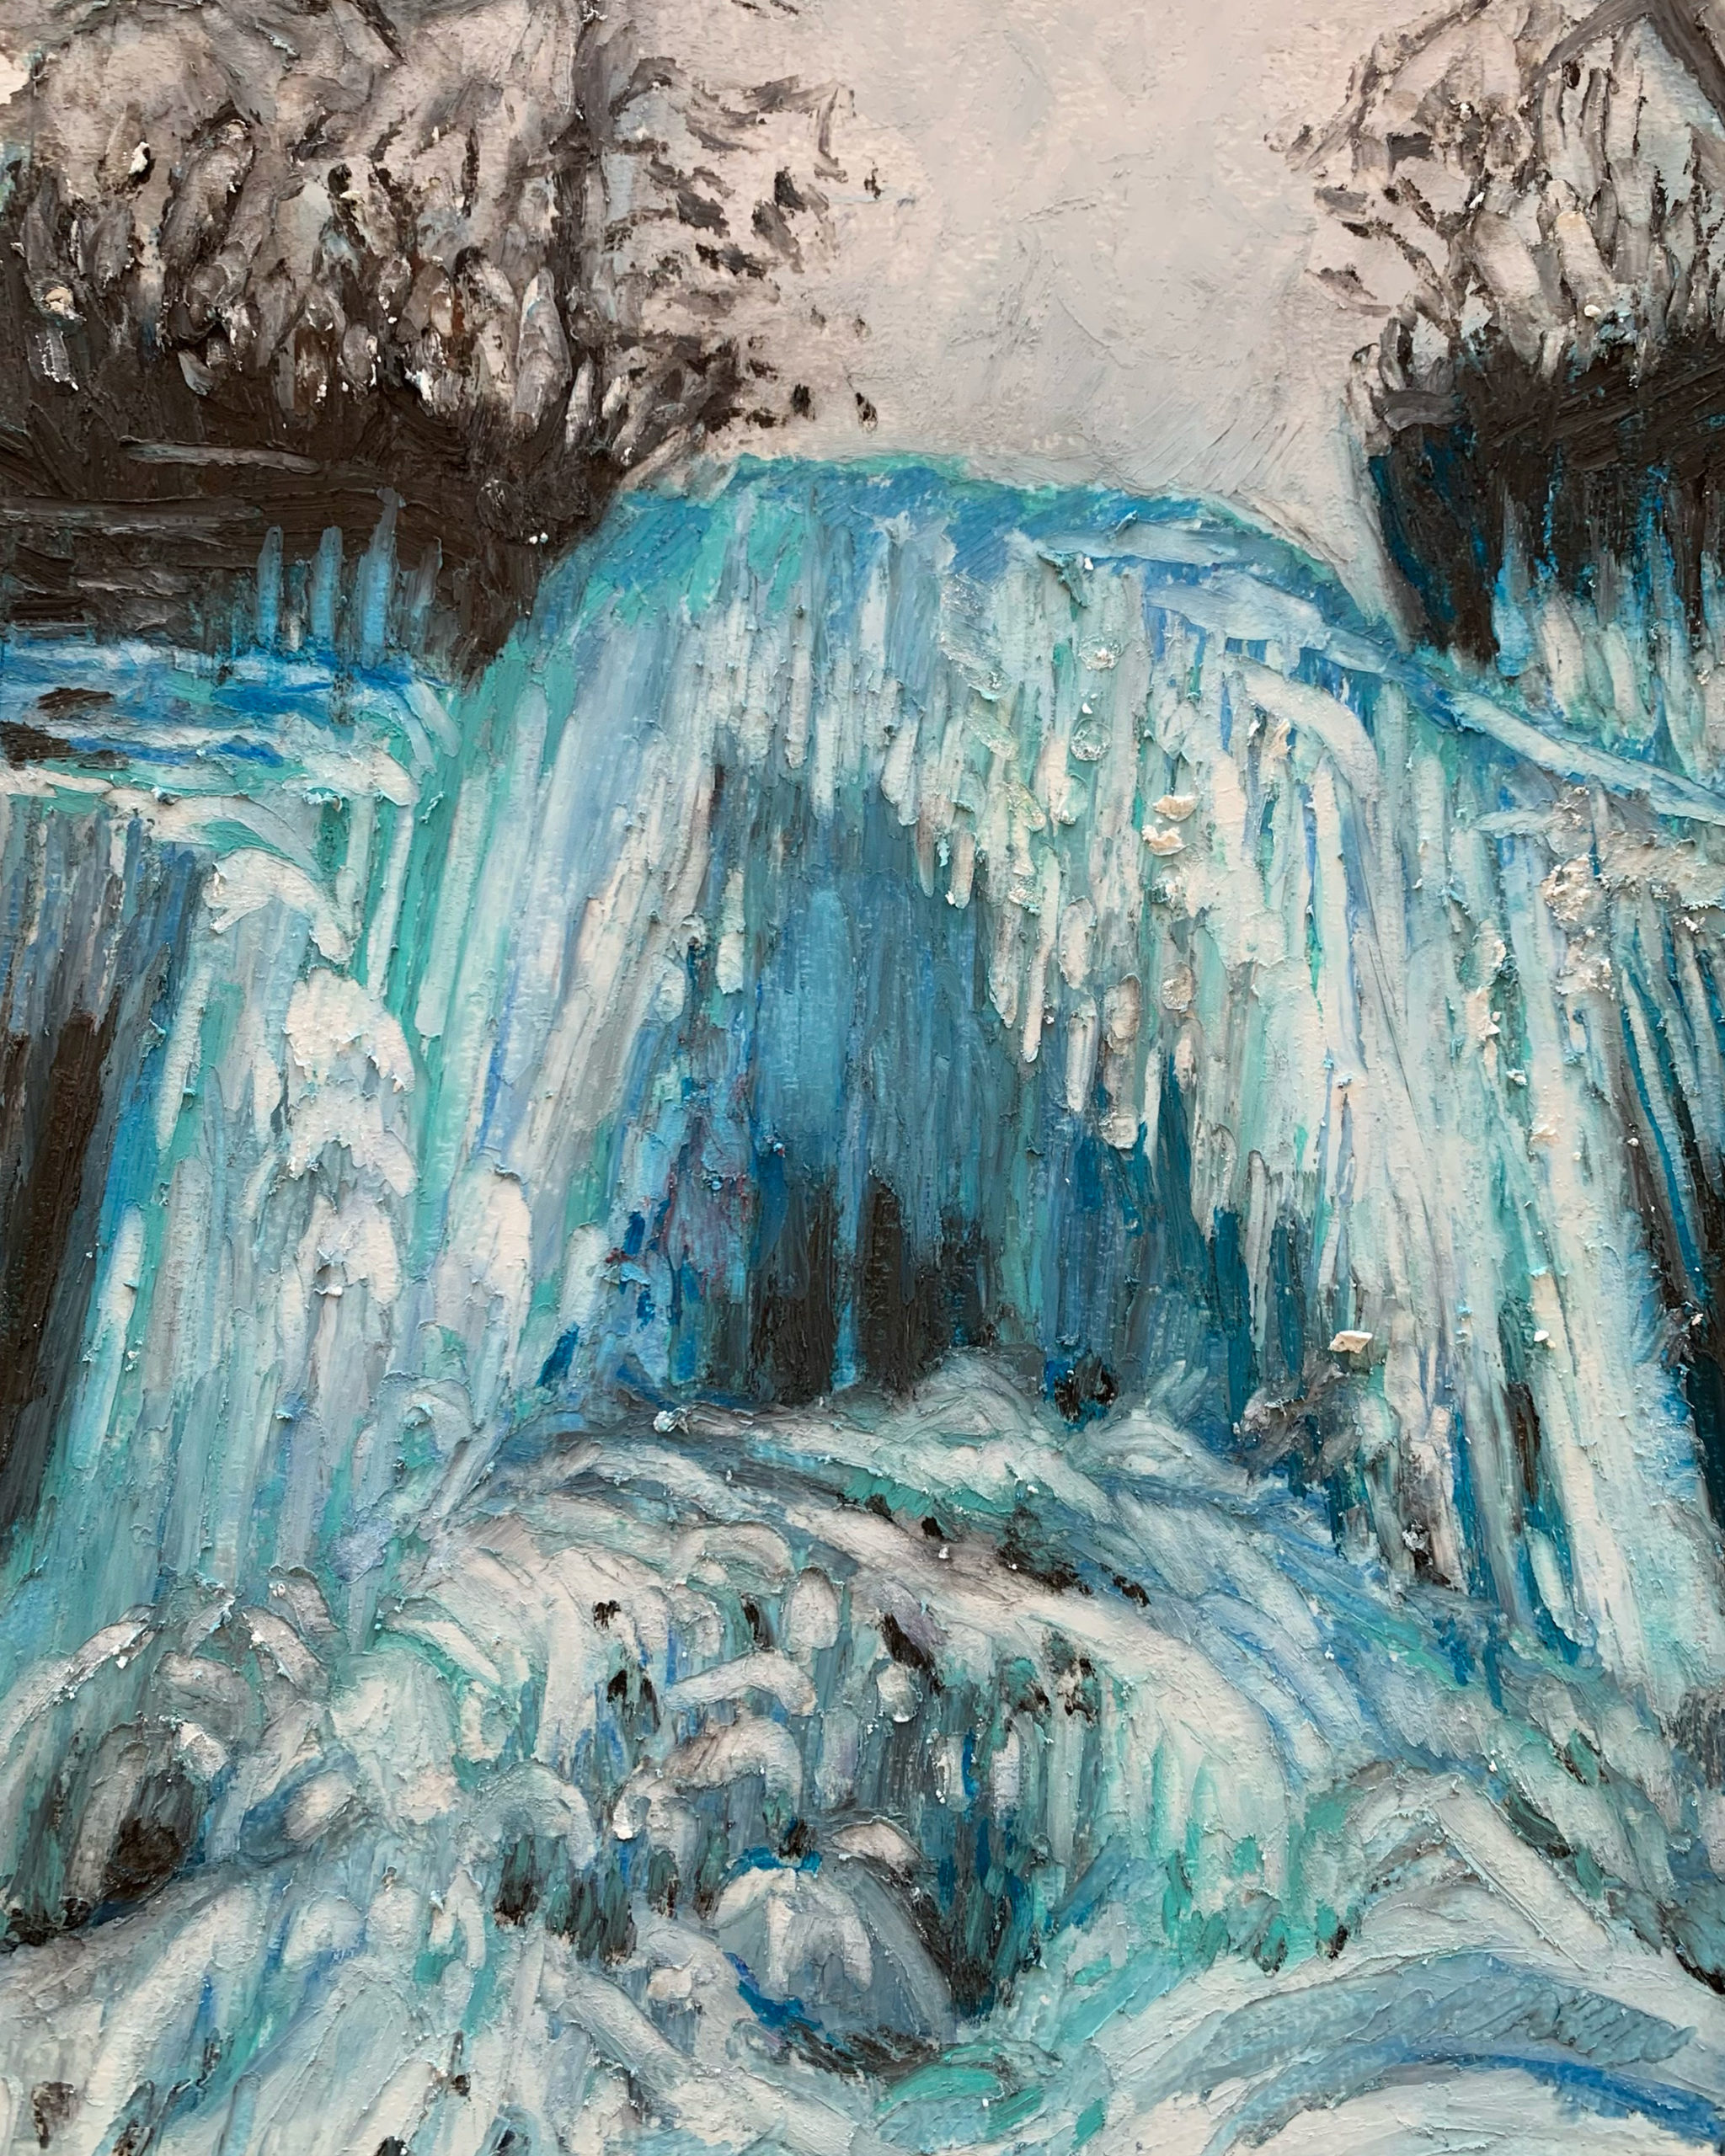 Icescape, 2021, 8” x 10”, oil pastel on paper, $200